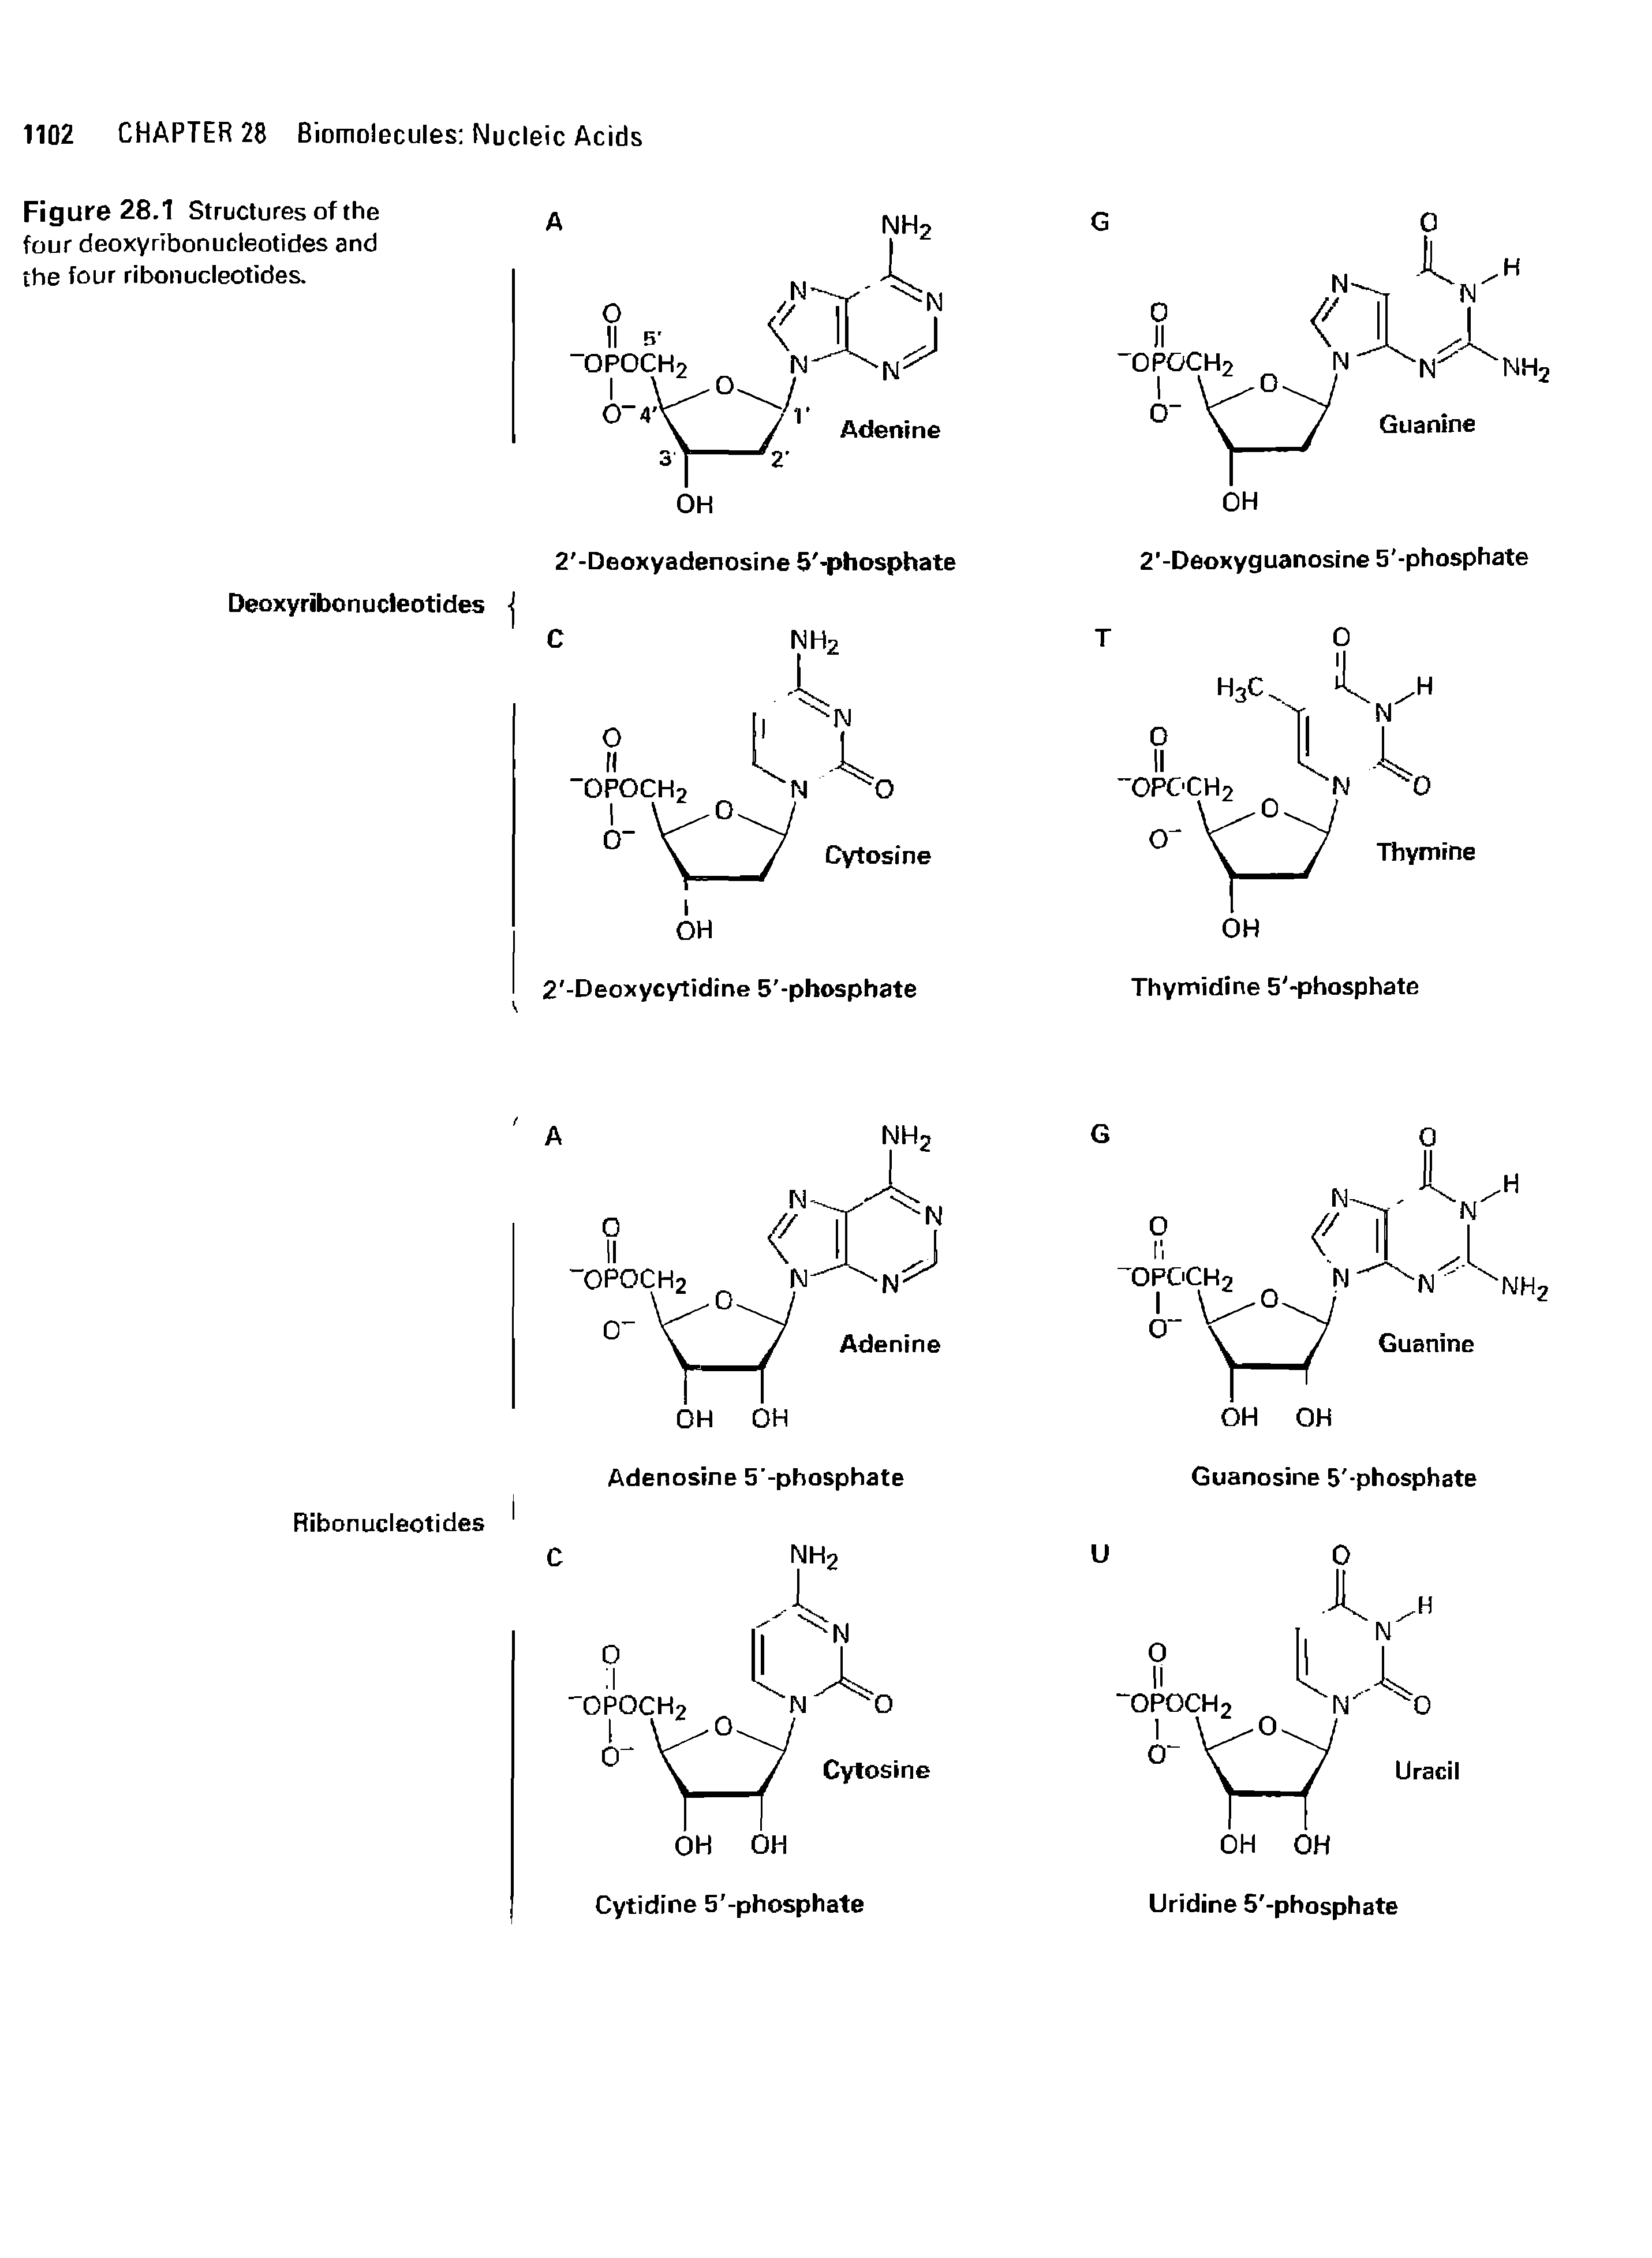 Figure 28.1 Structures of the four deoxyribonucleotides and the four ribonucleotides.